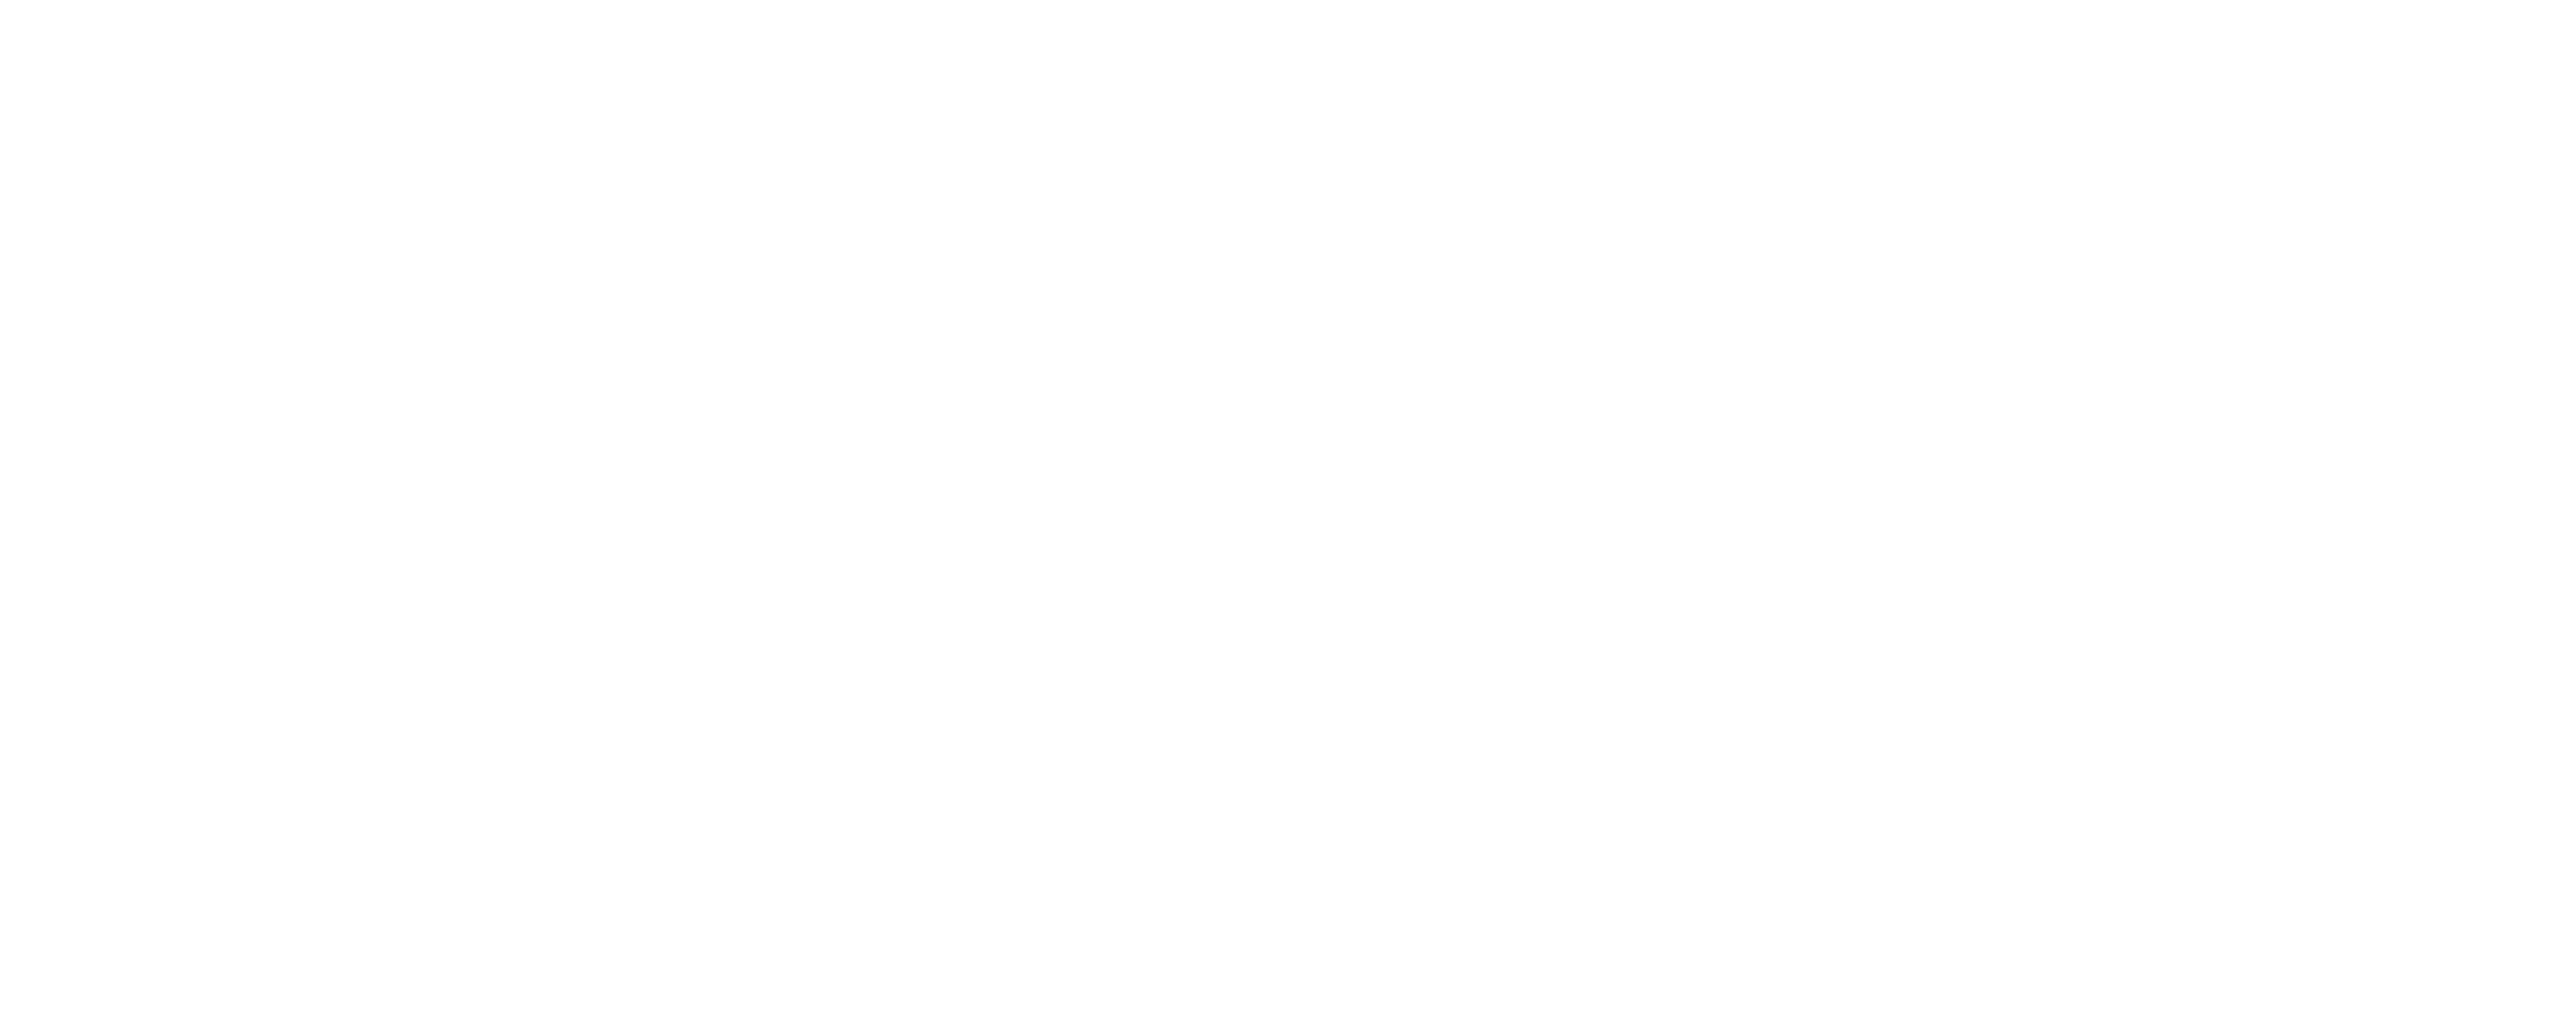 Specialized Housing Counselors